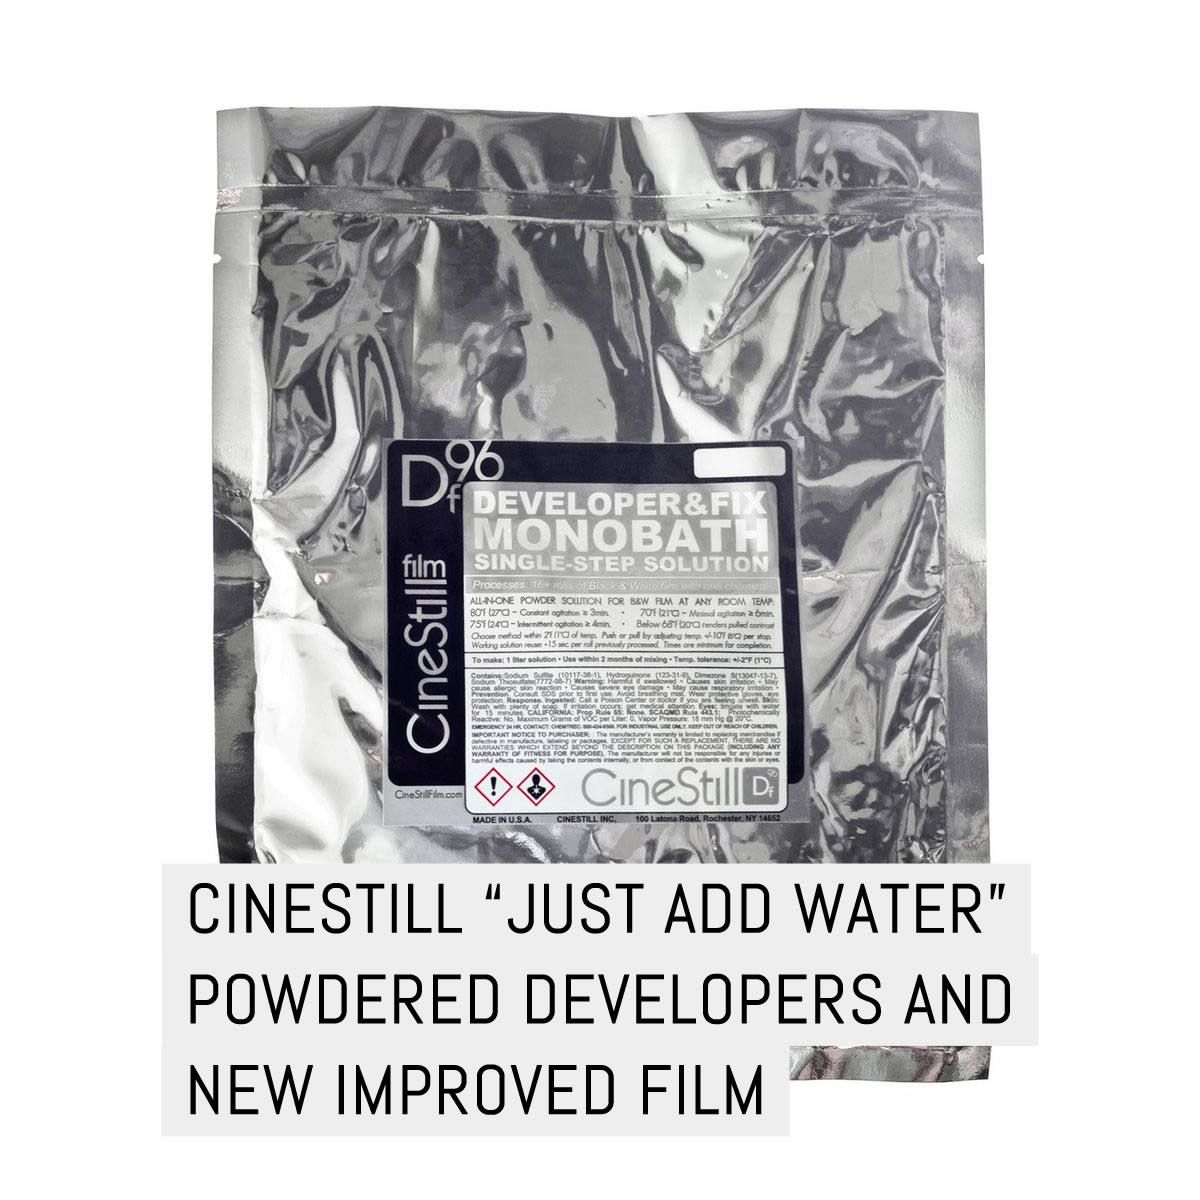 New in: CineStill “just add water” powdered developers and new improved film